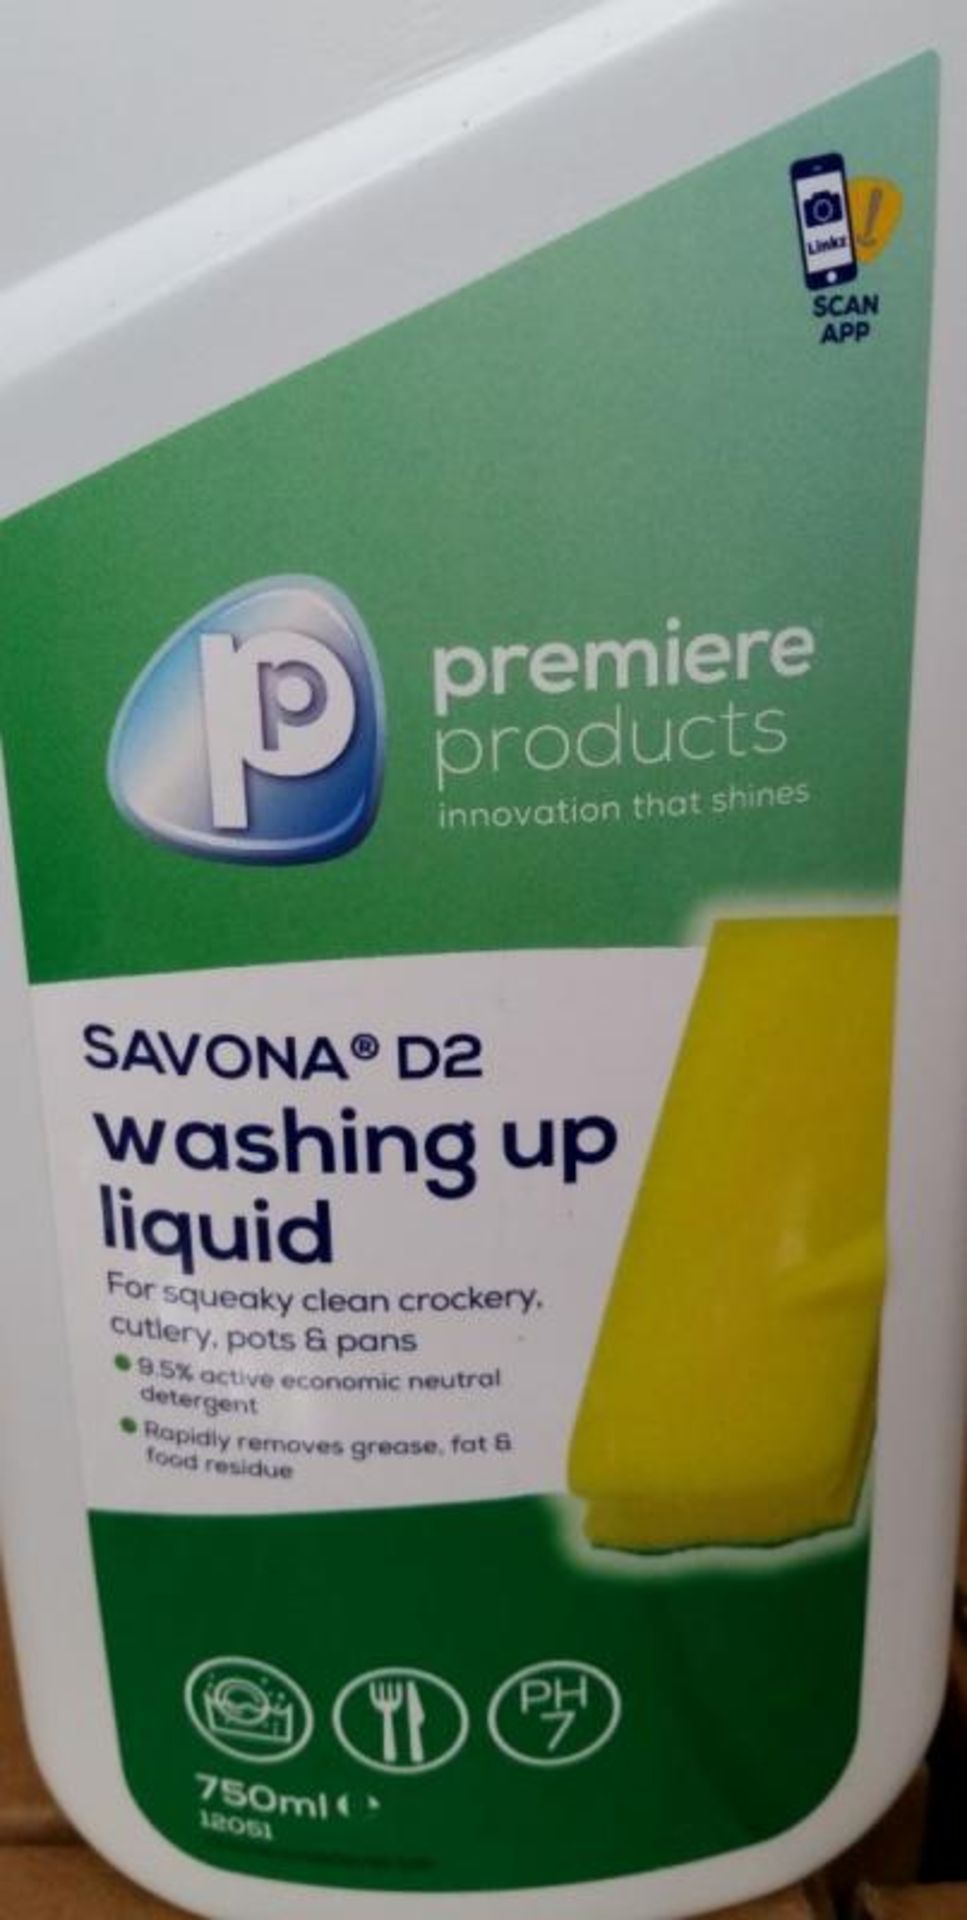 12 x Premiere Products 750ml Savona D2 Washing Up Liquid - For Squeaky Clean Crockery, Cutlery, Pots - Image 3 of 6